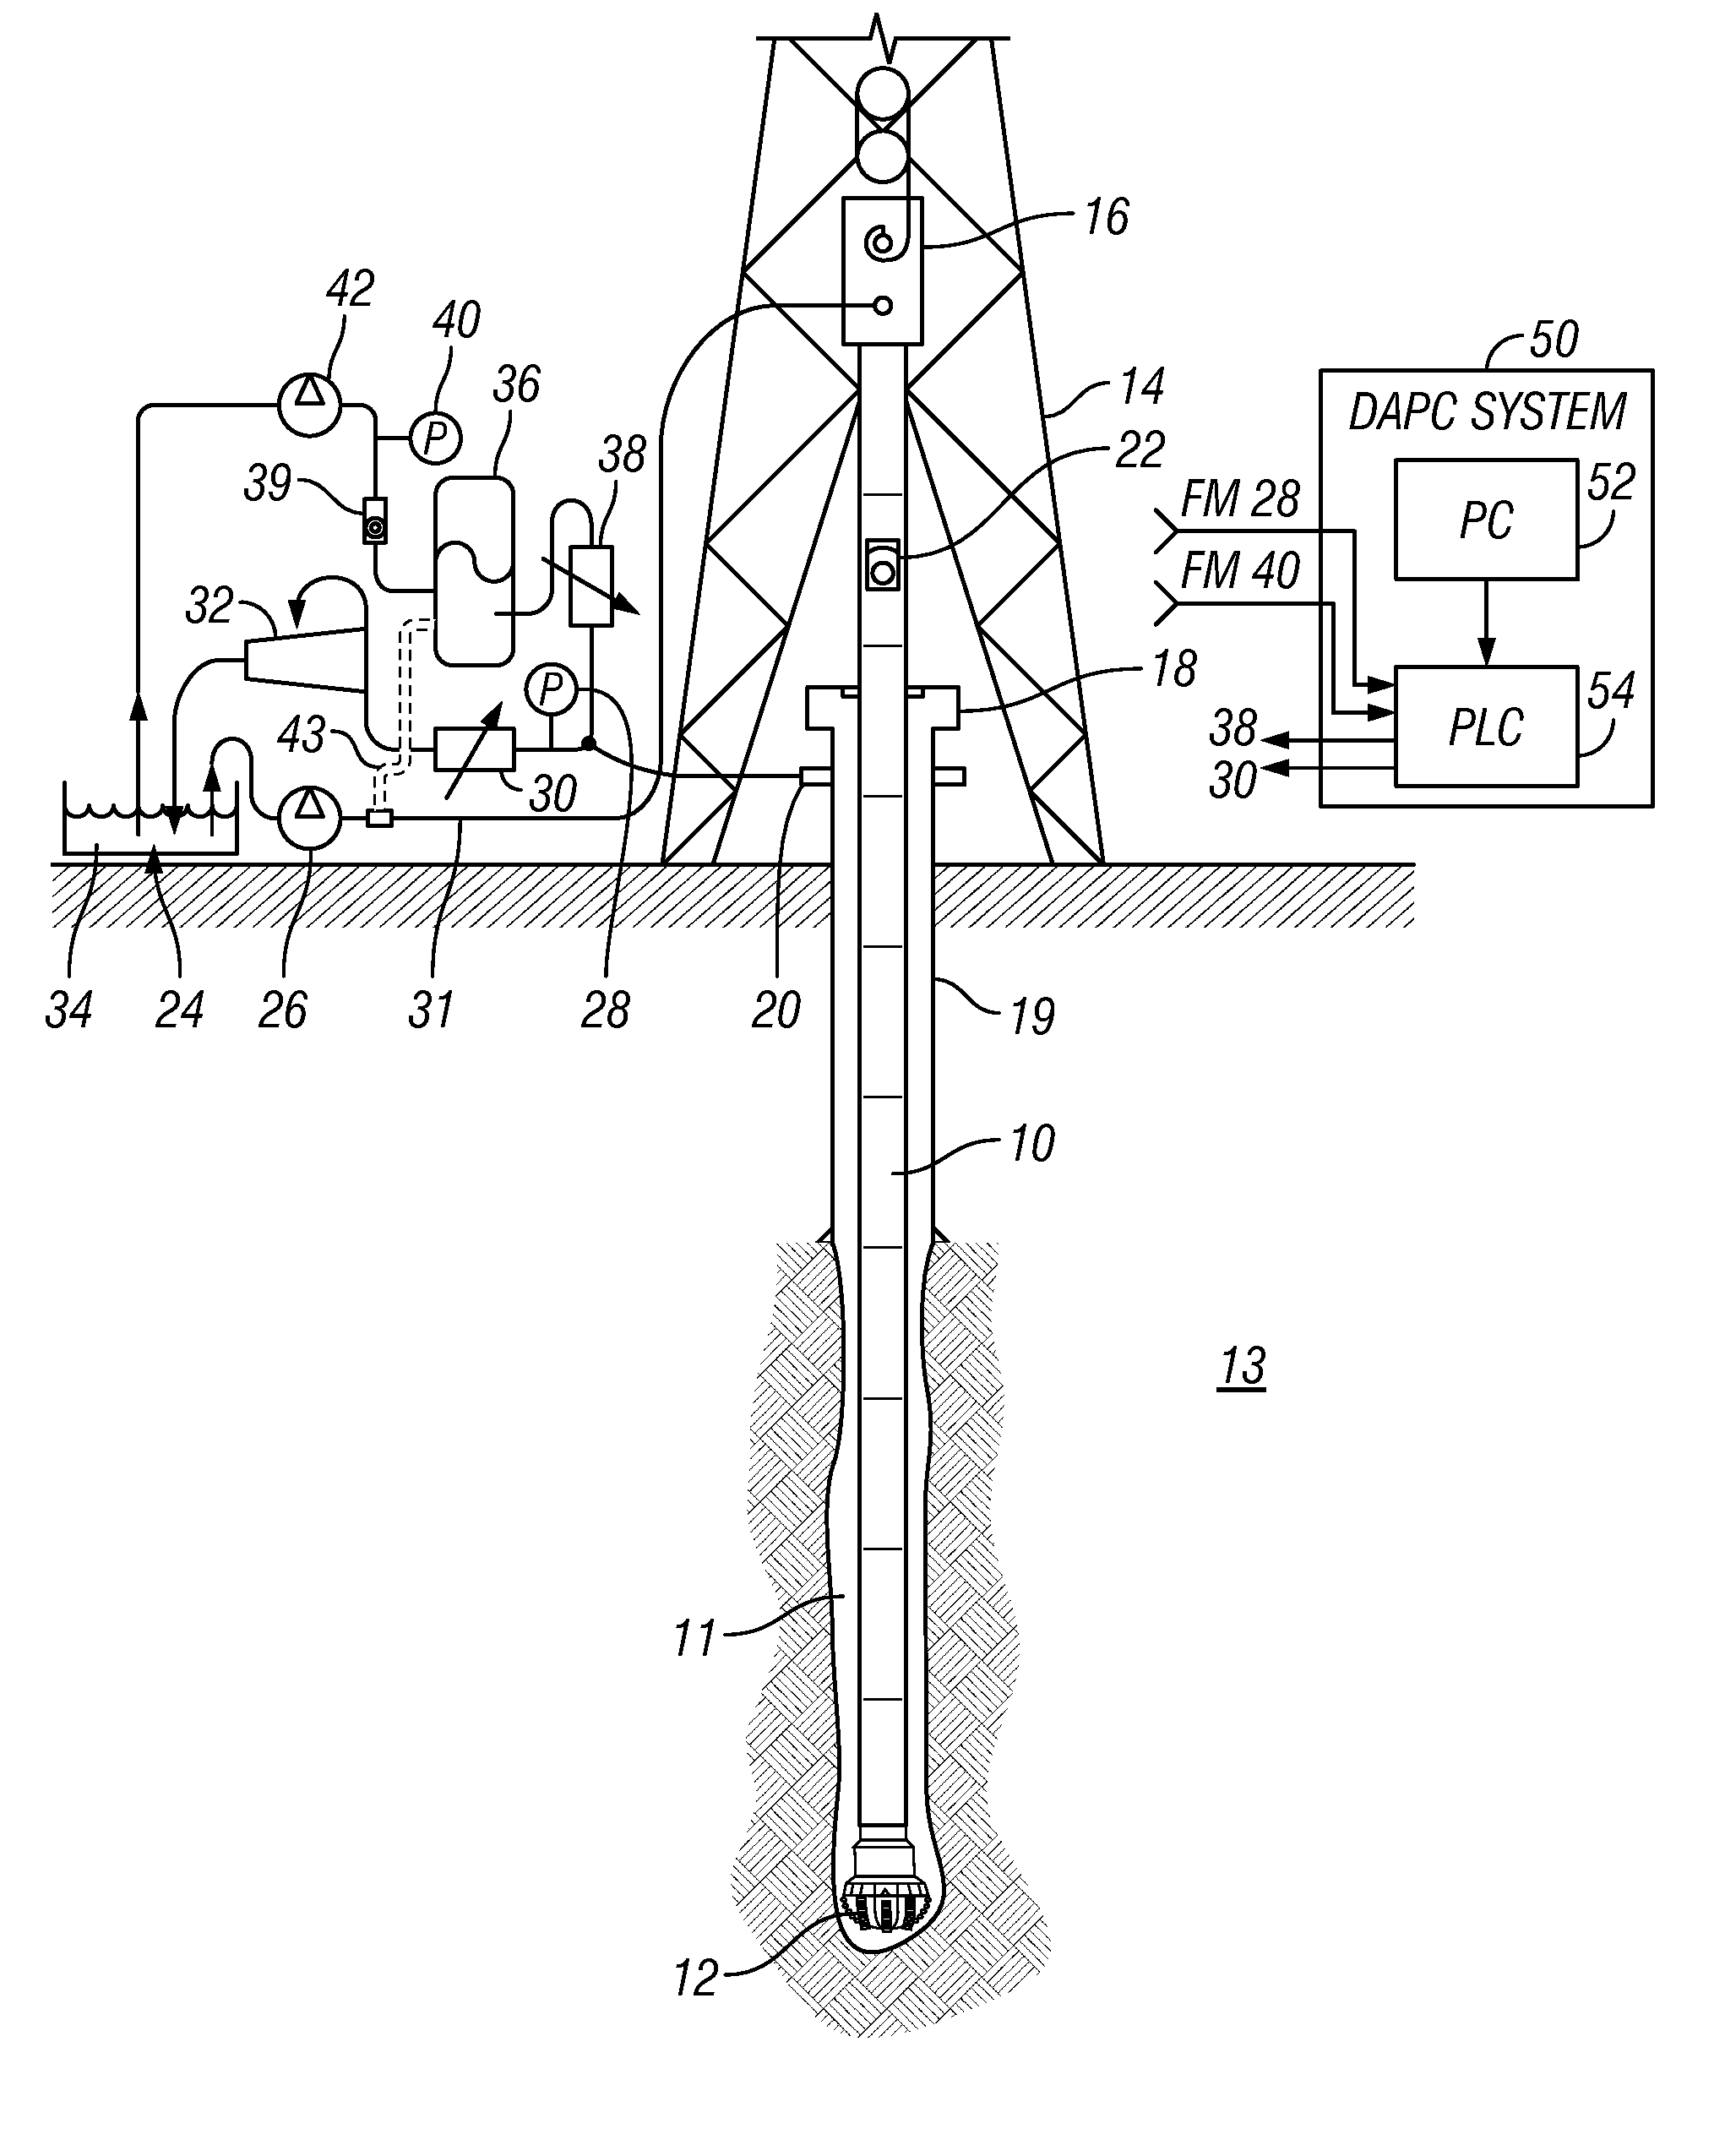 Wellbore annular pressure control system and method using accumulator to maintain back pressure in annulus